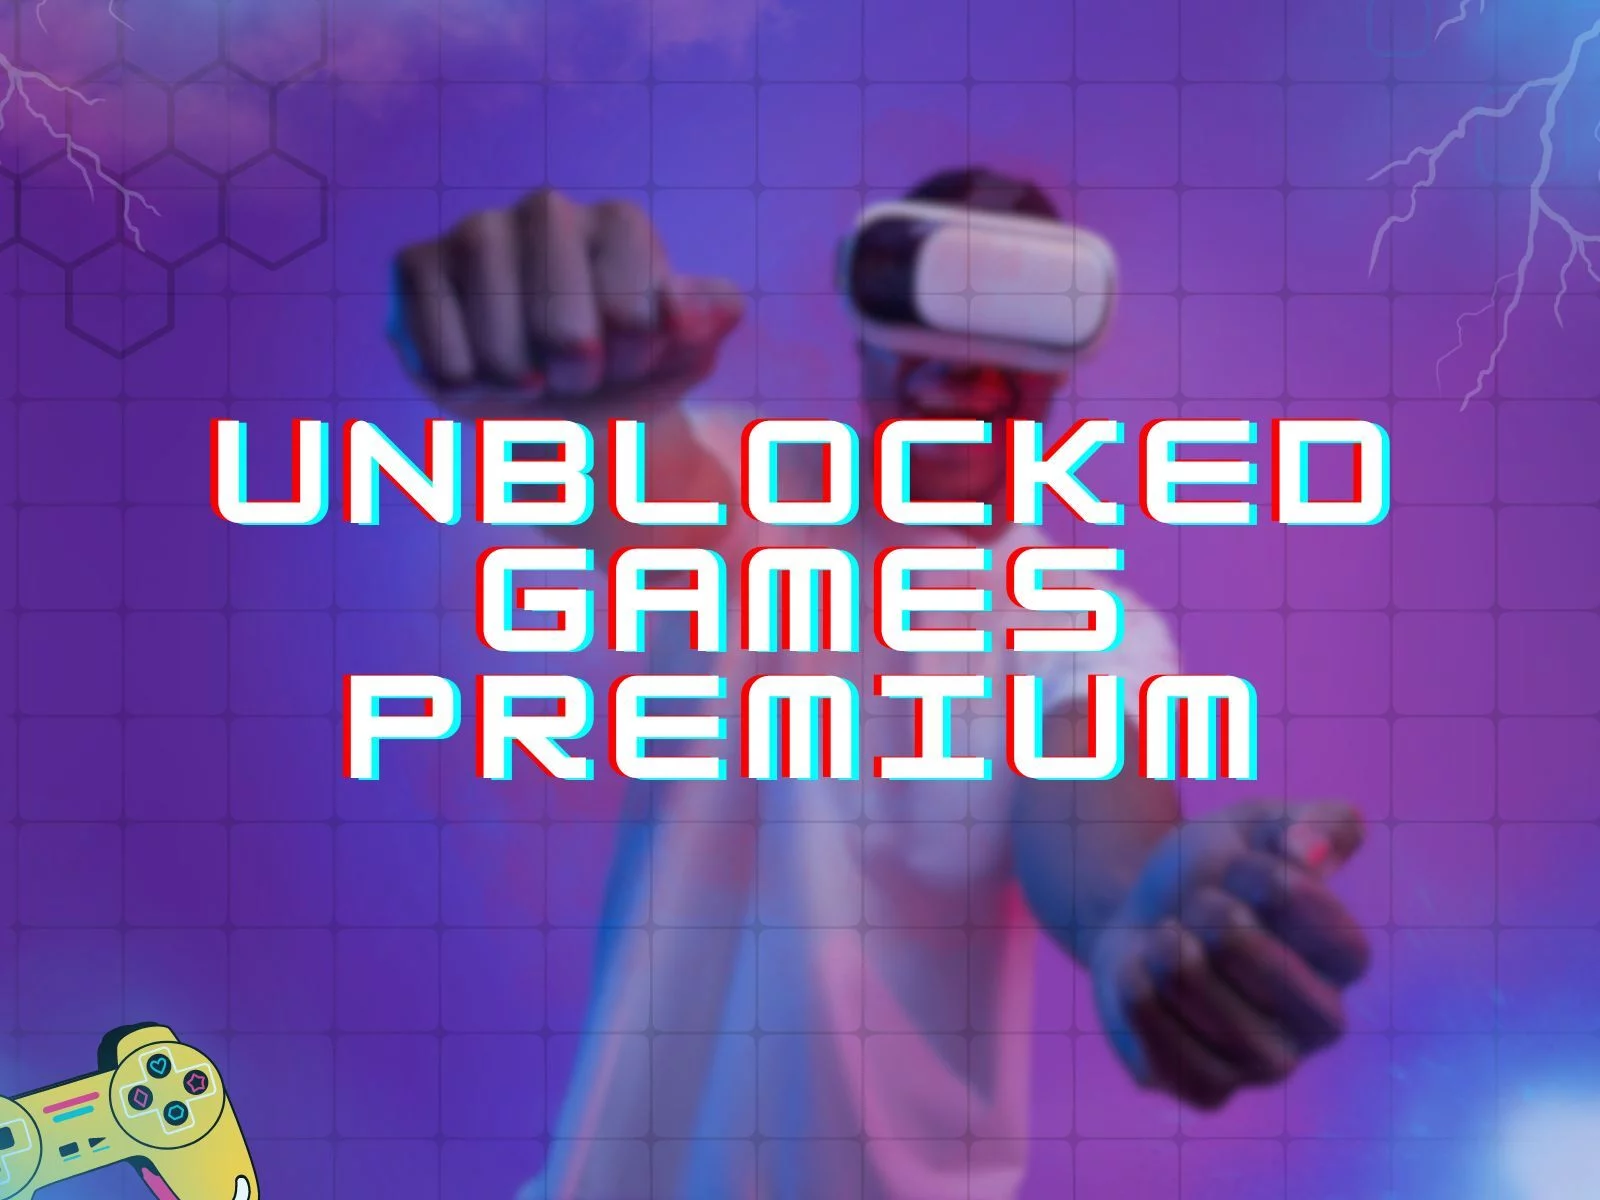 A guy playing using VR in the background and a text on the image spelled Unblocked Games Premium